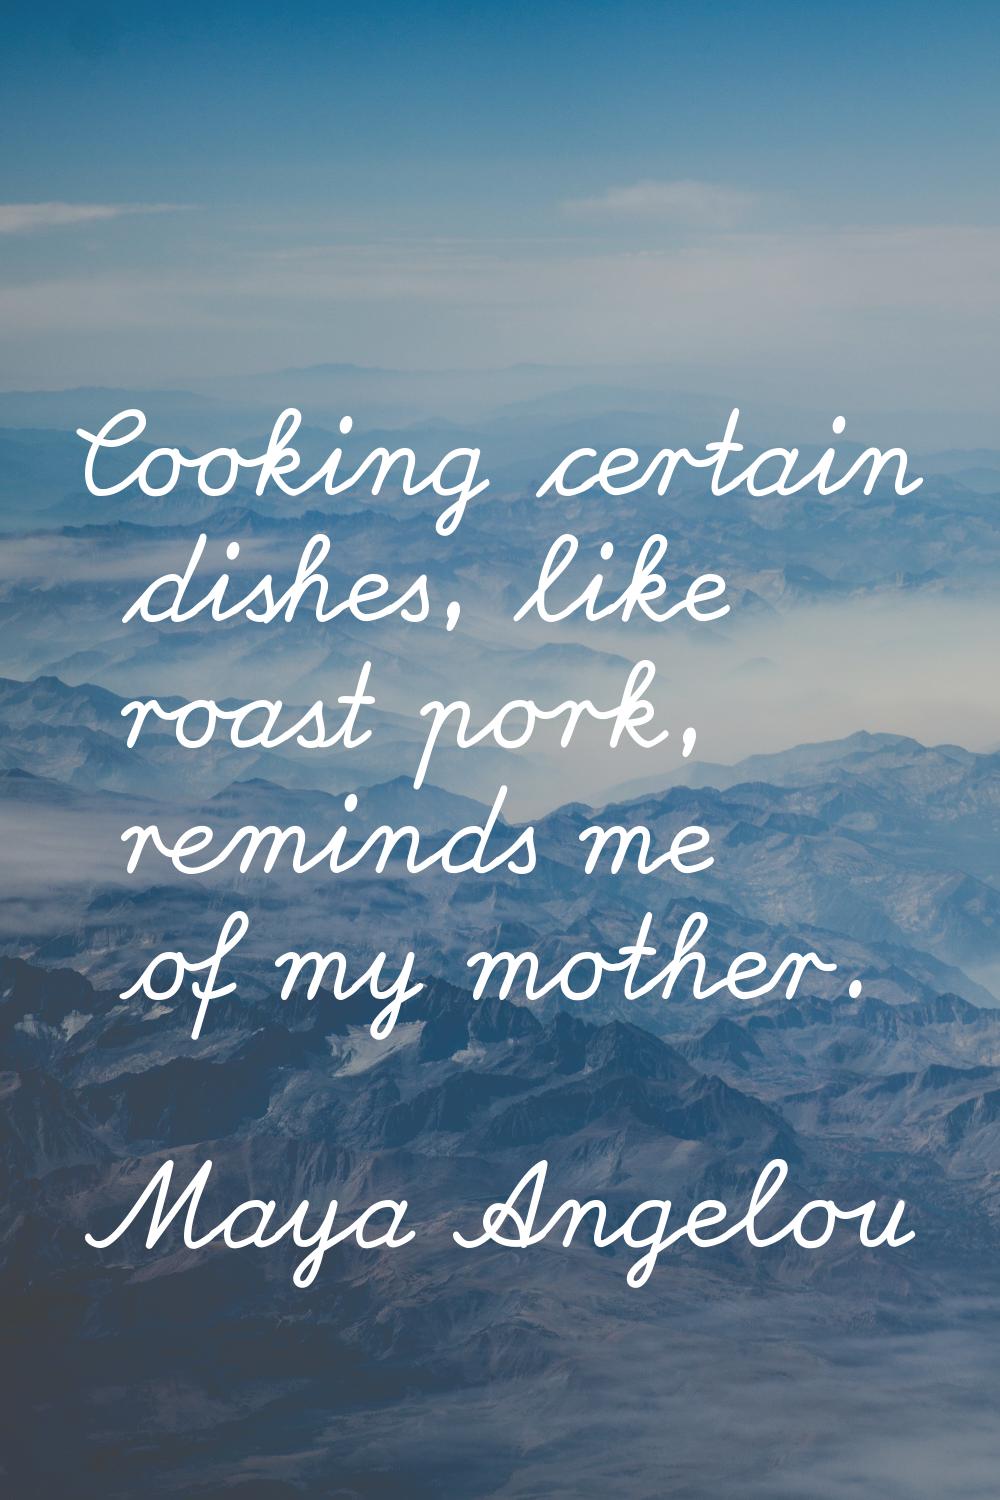 Cooking certain dishes, like roast pork, reminds me of my mother.